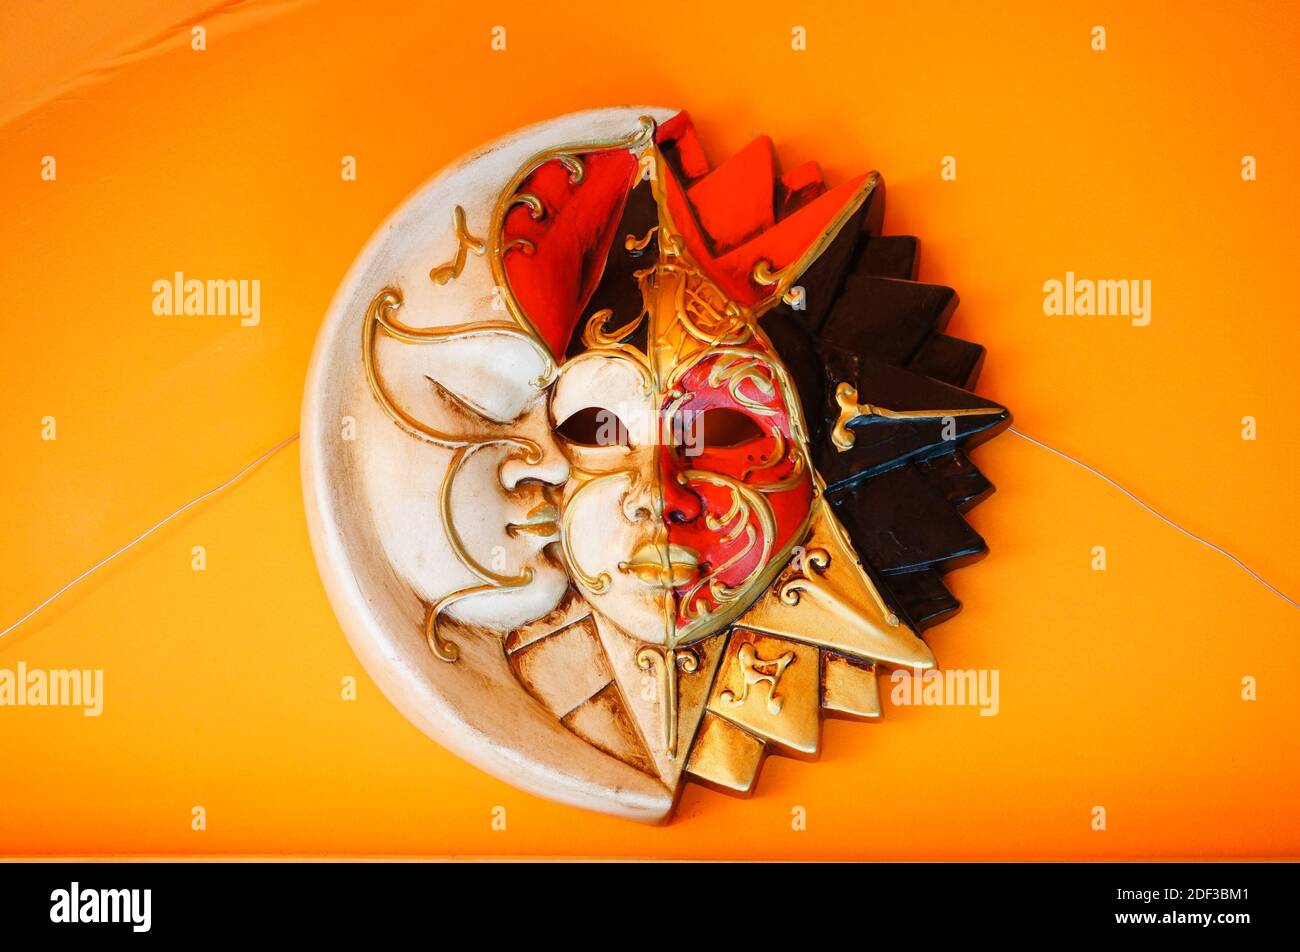 A dramatic theater mask isolated on the orange background Stock Photo